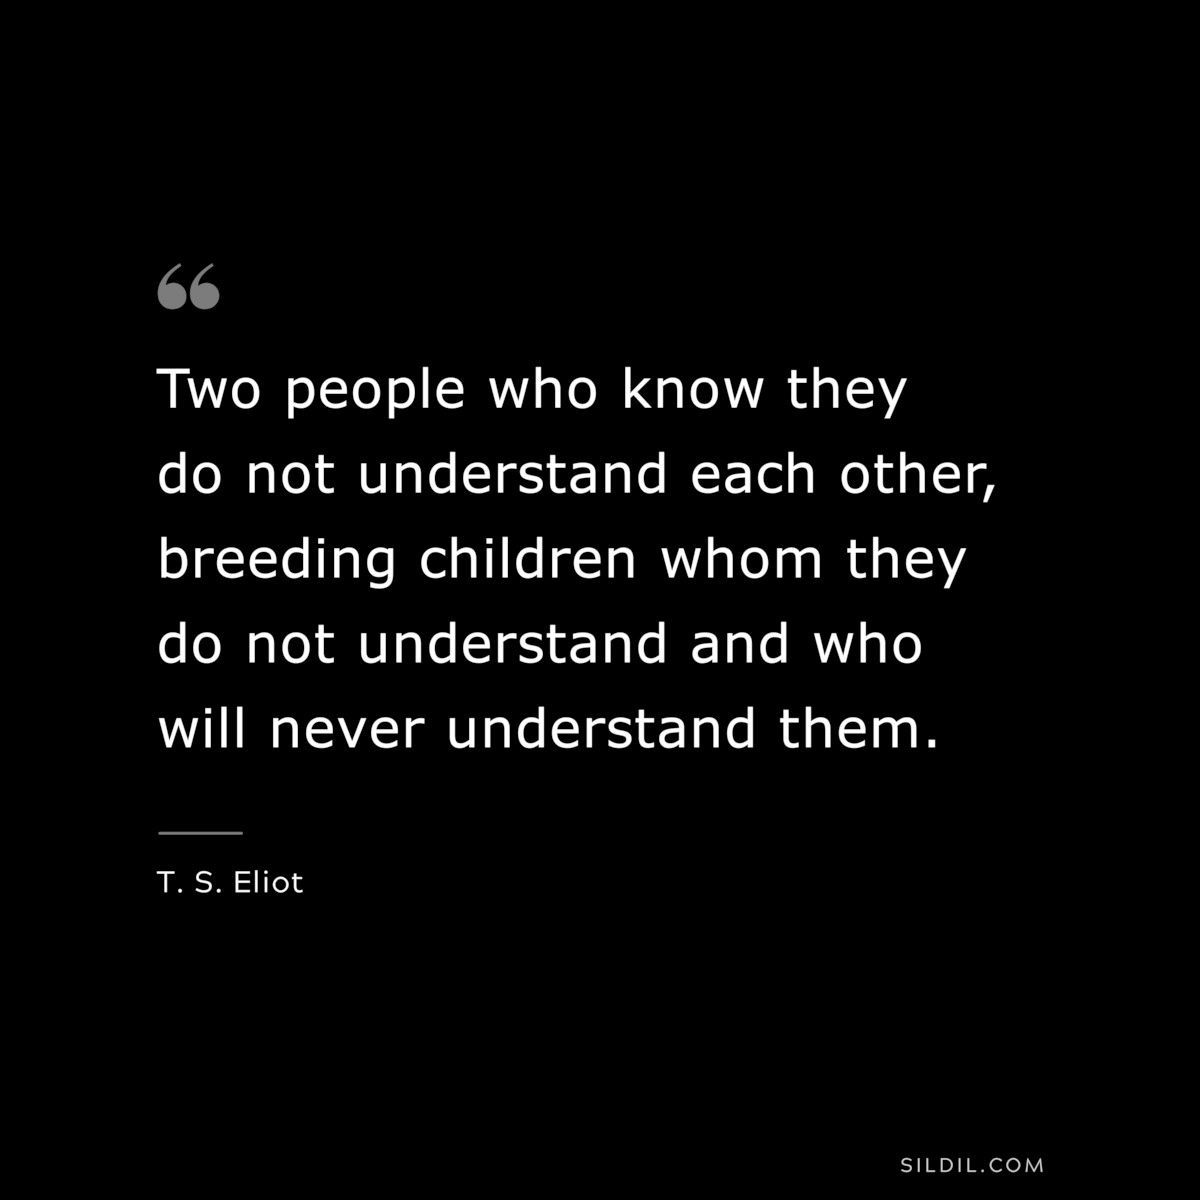 Two people who know they do not understand each other, breeding children whom they do not understand and who will never understand them. ― T. S. Eliot